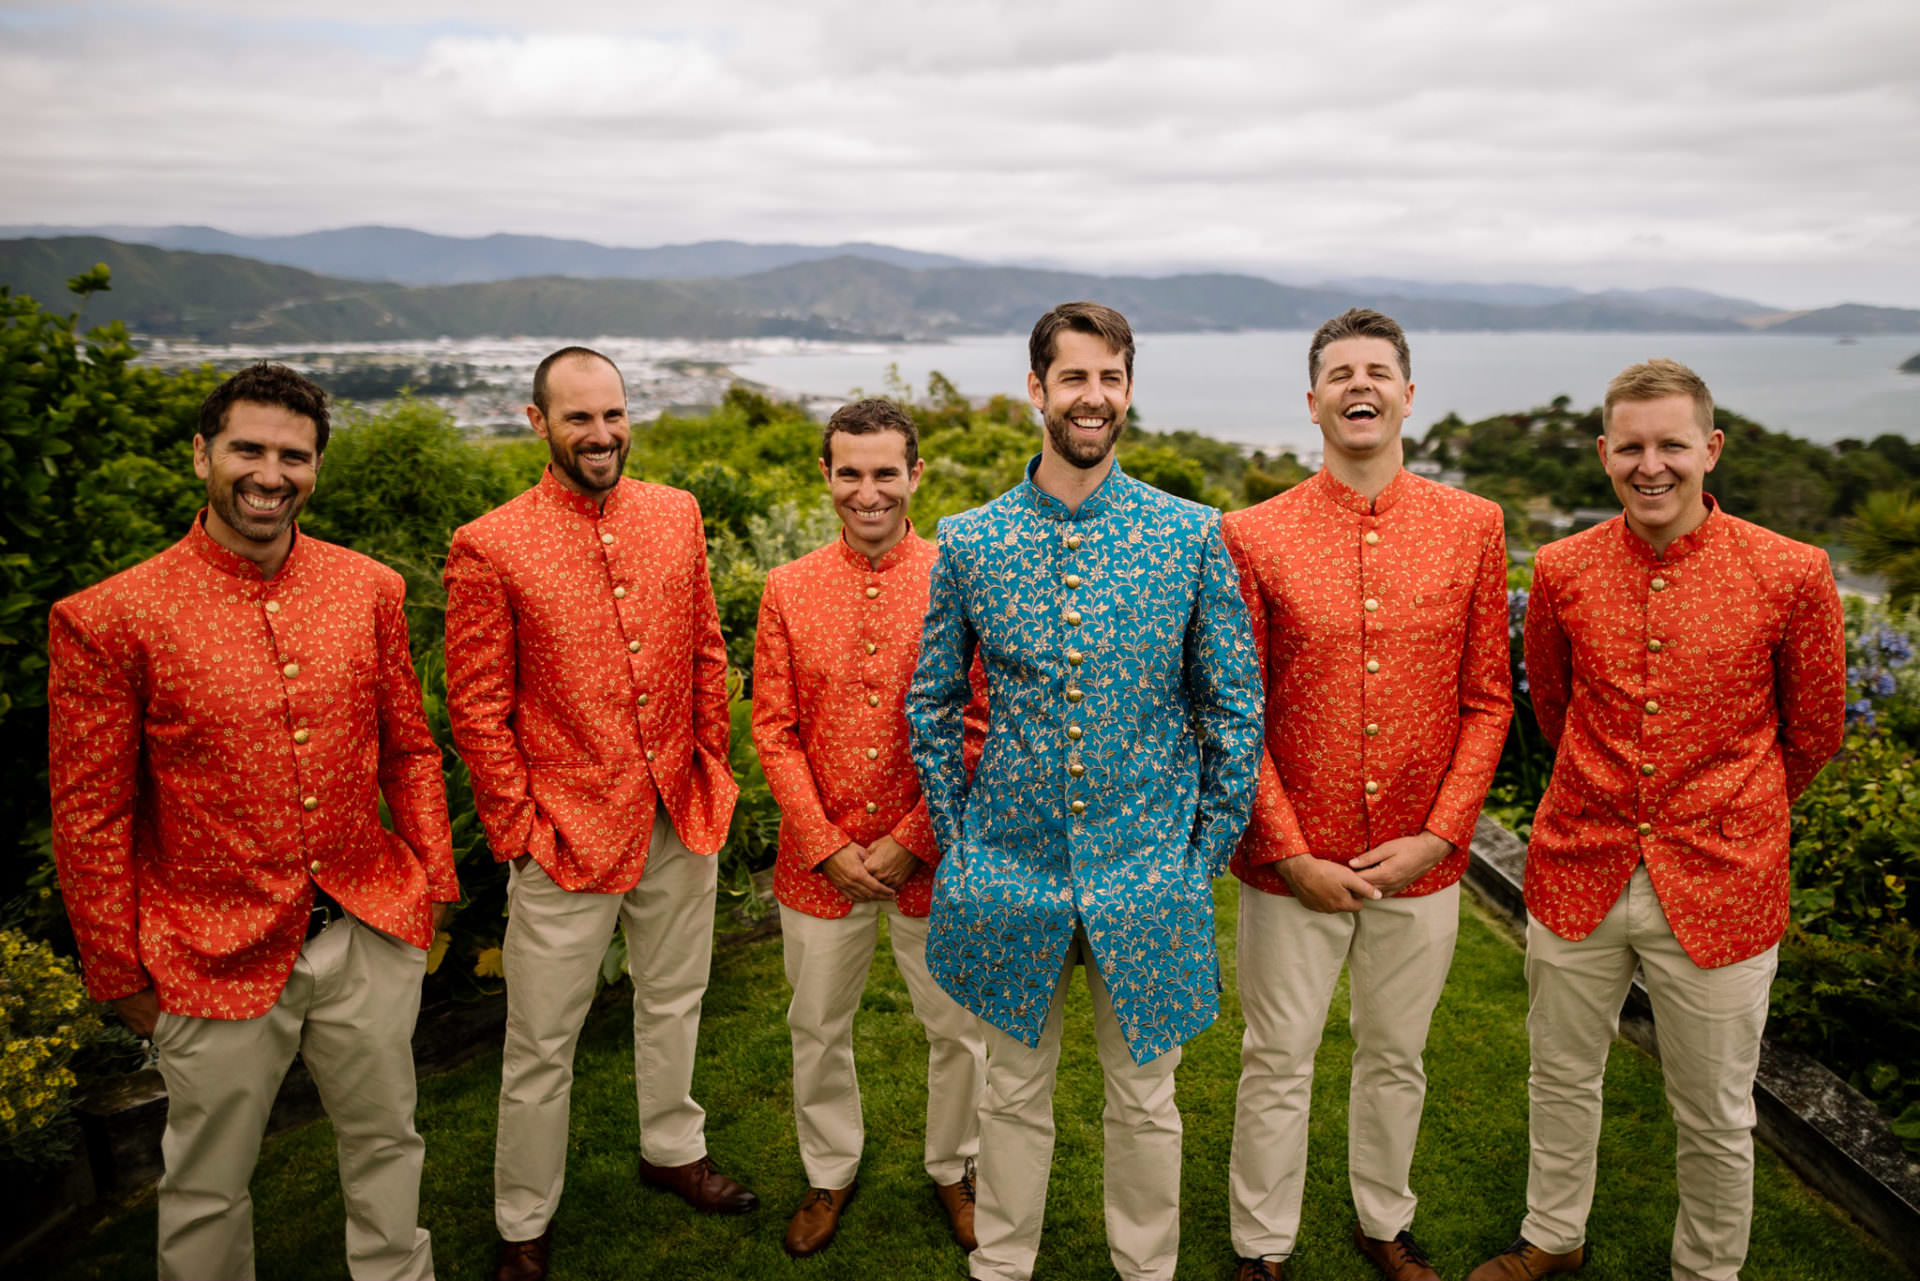 Western Indian fusion wedding day with groom and groomsmen in traditional Sherwani 